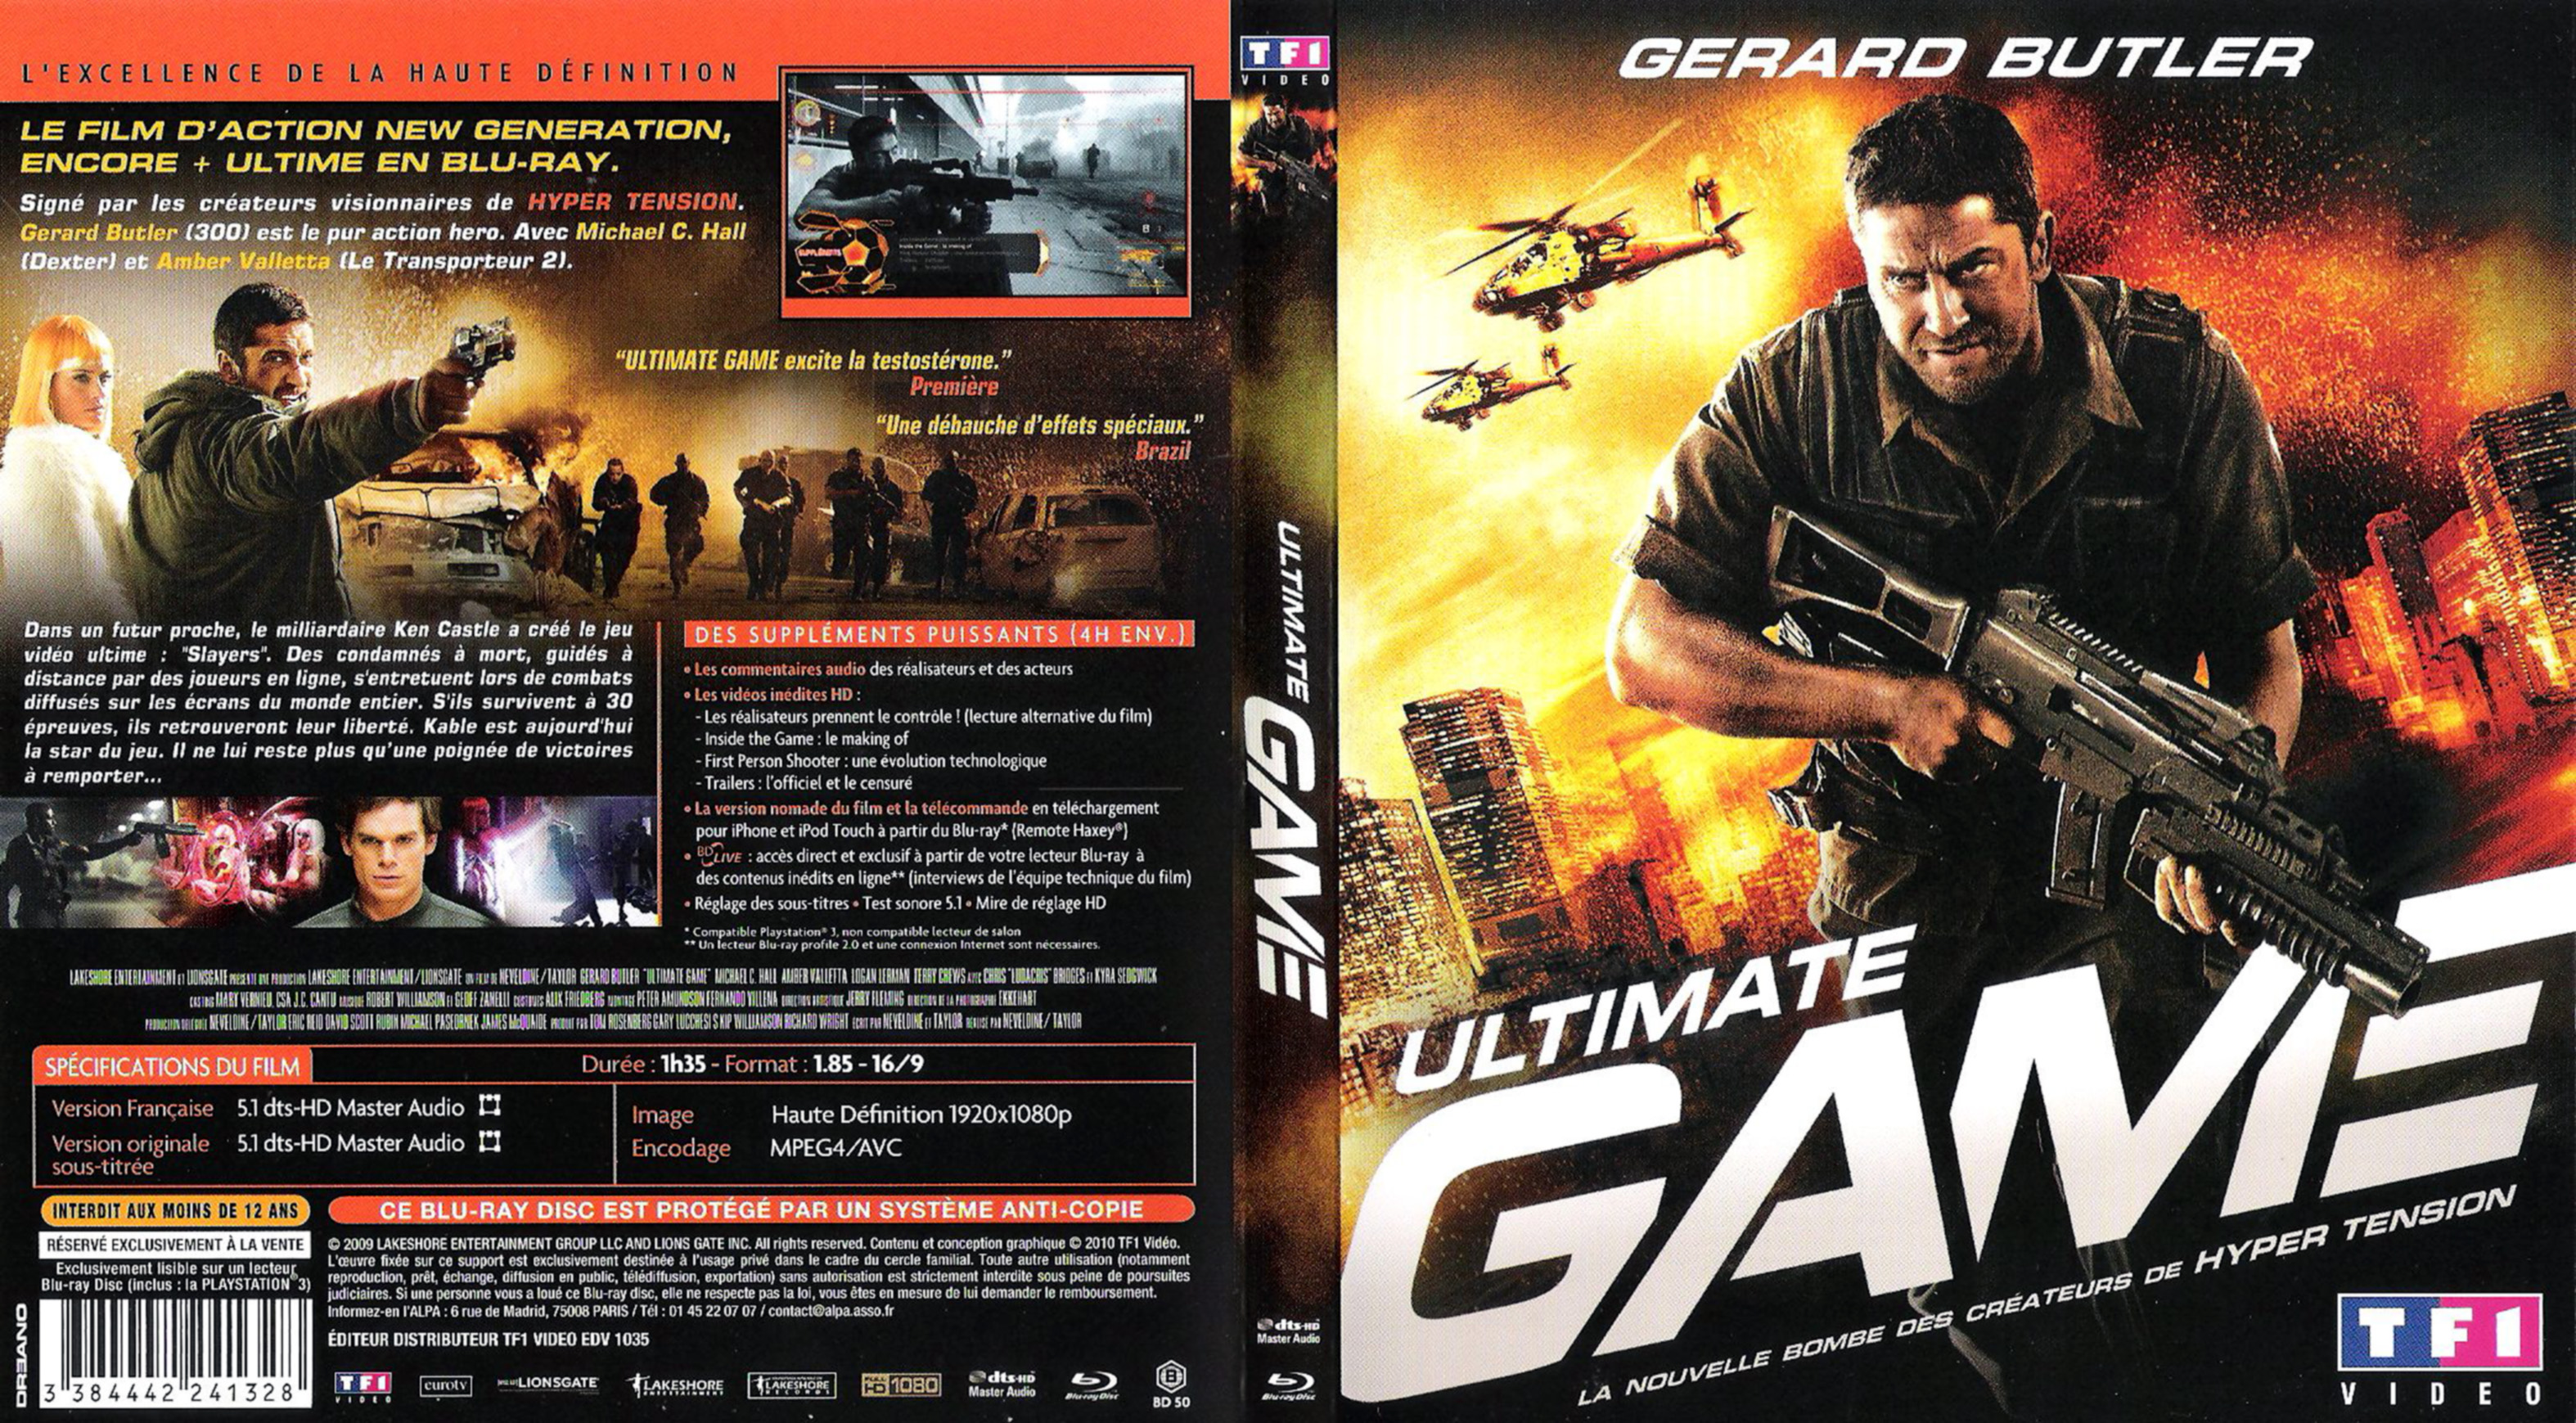 Jaquette DVD Ultimate game (BLU-RAY)